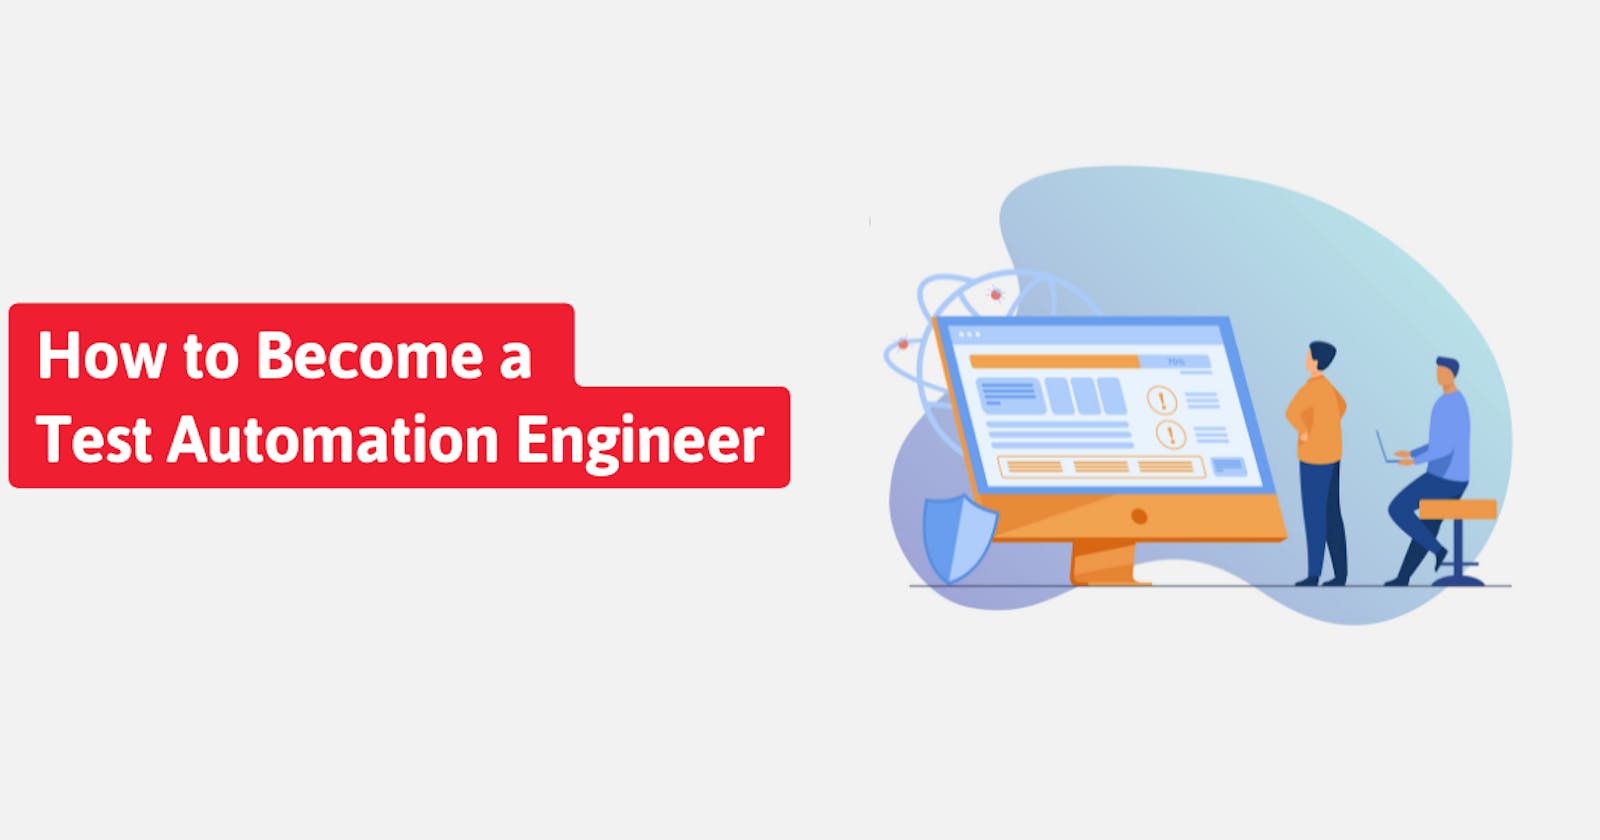 How to Become a Test Automation Engineer